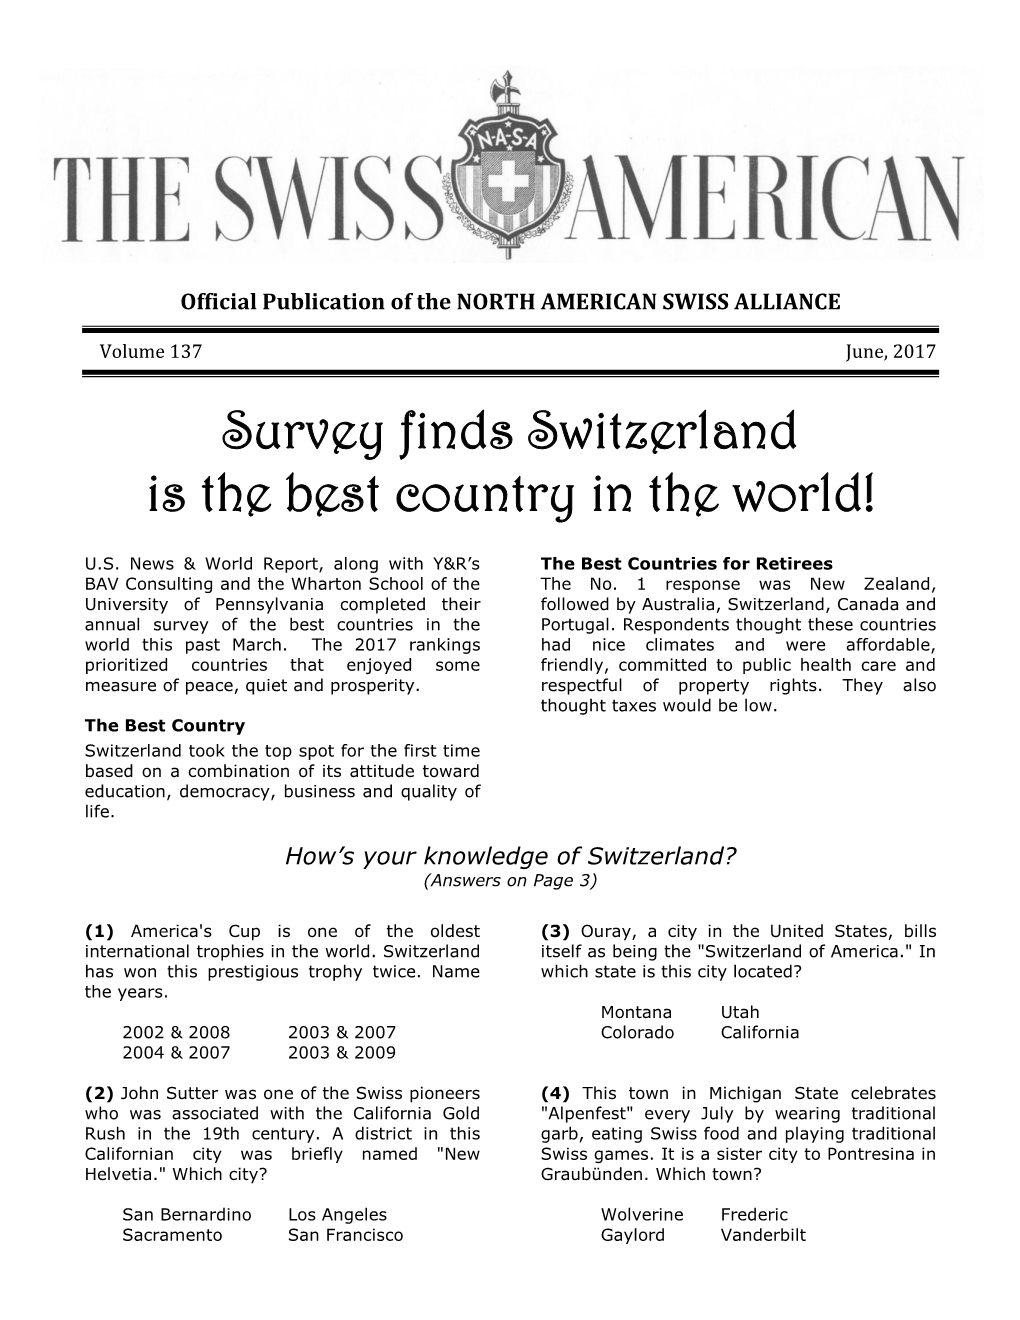 Survey Finds Switzerland Is the Best Country in the World!